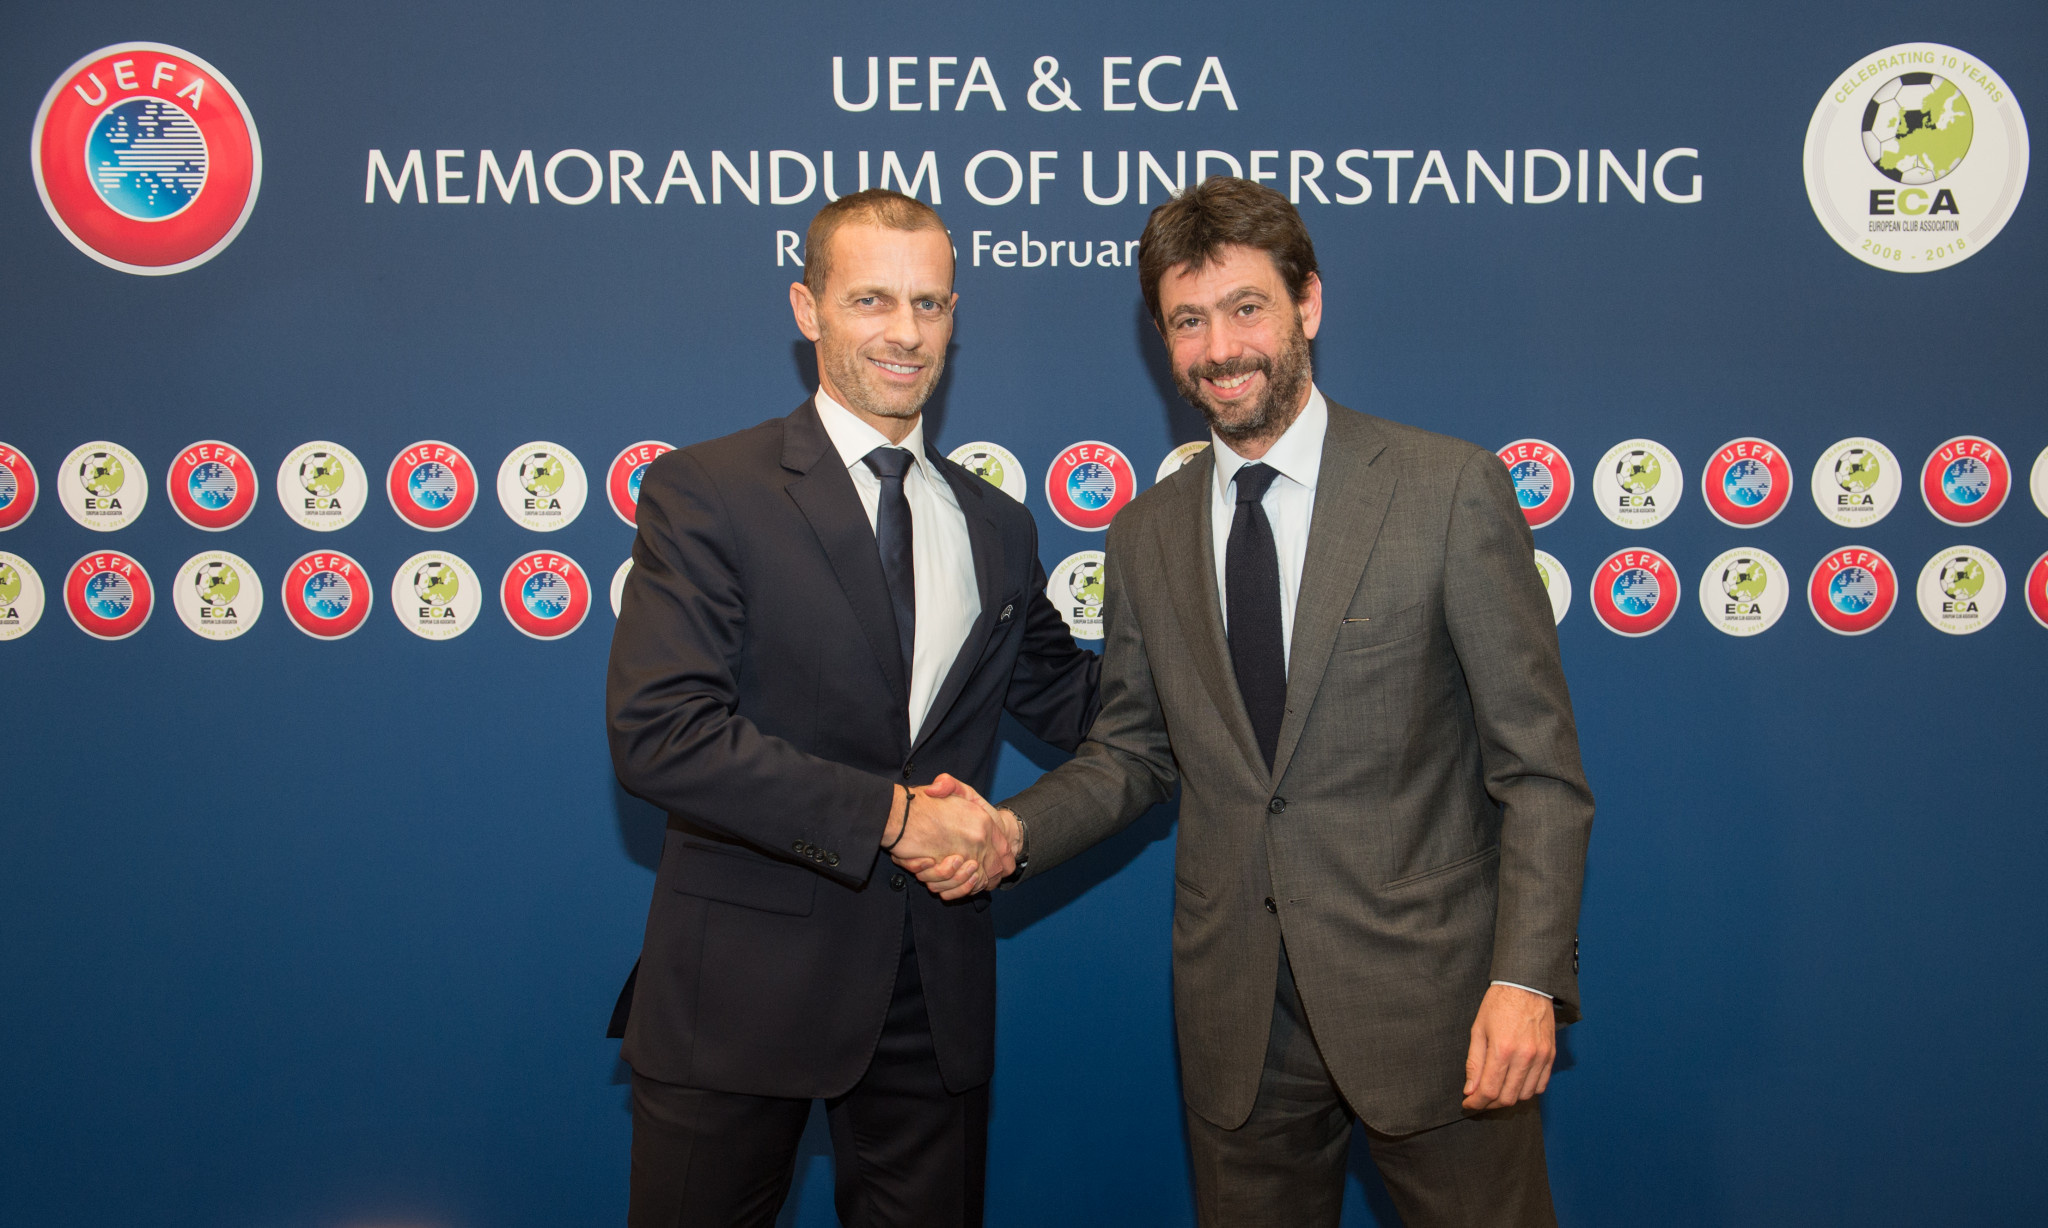 A renewed Memorandum of Understanding was signed by UEFA and the European Club Association in Rome today ©UEFA